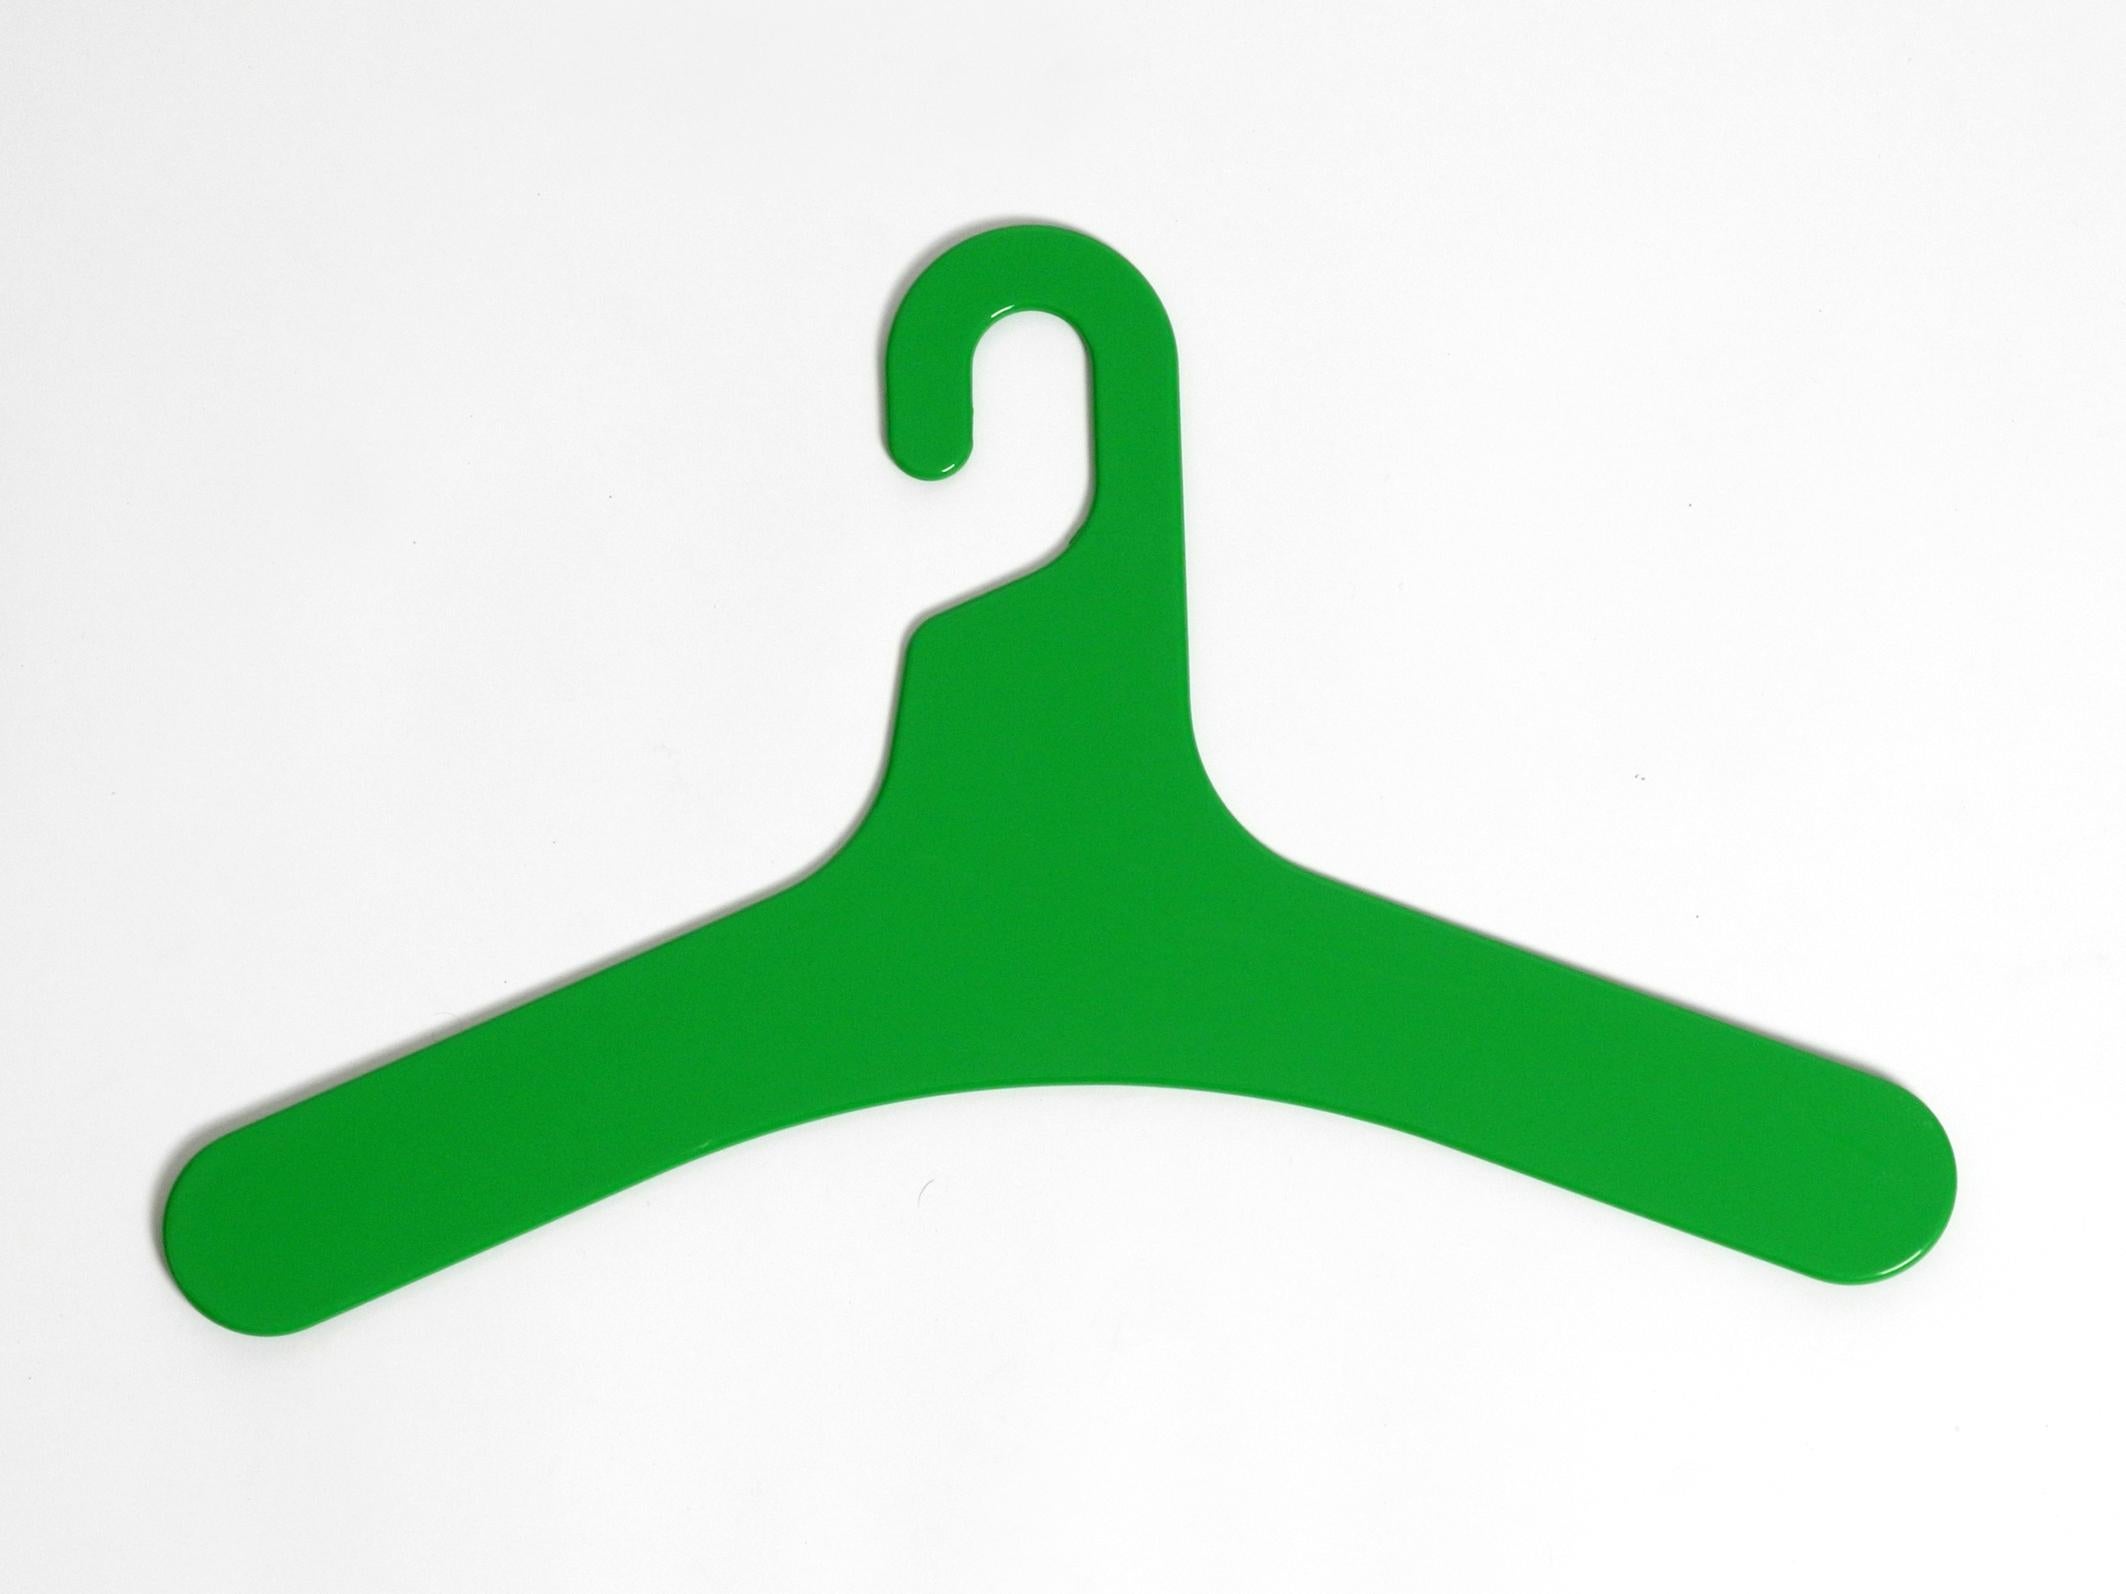 Plastic 6 original unused green plastic clothes hangers from the 1970s by Ingo Maurer 